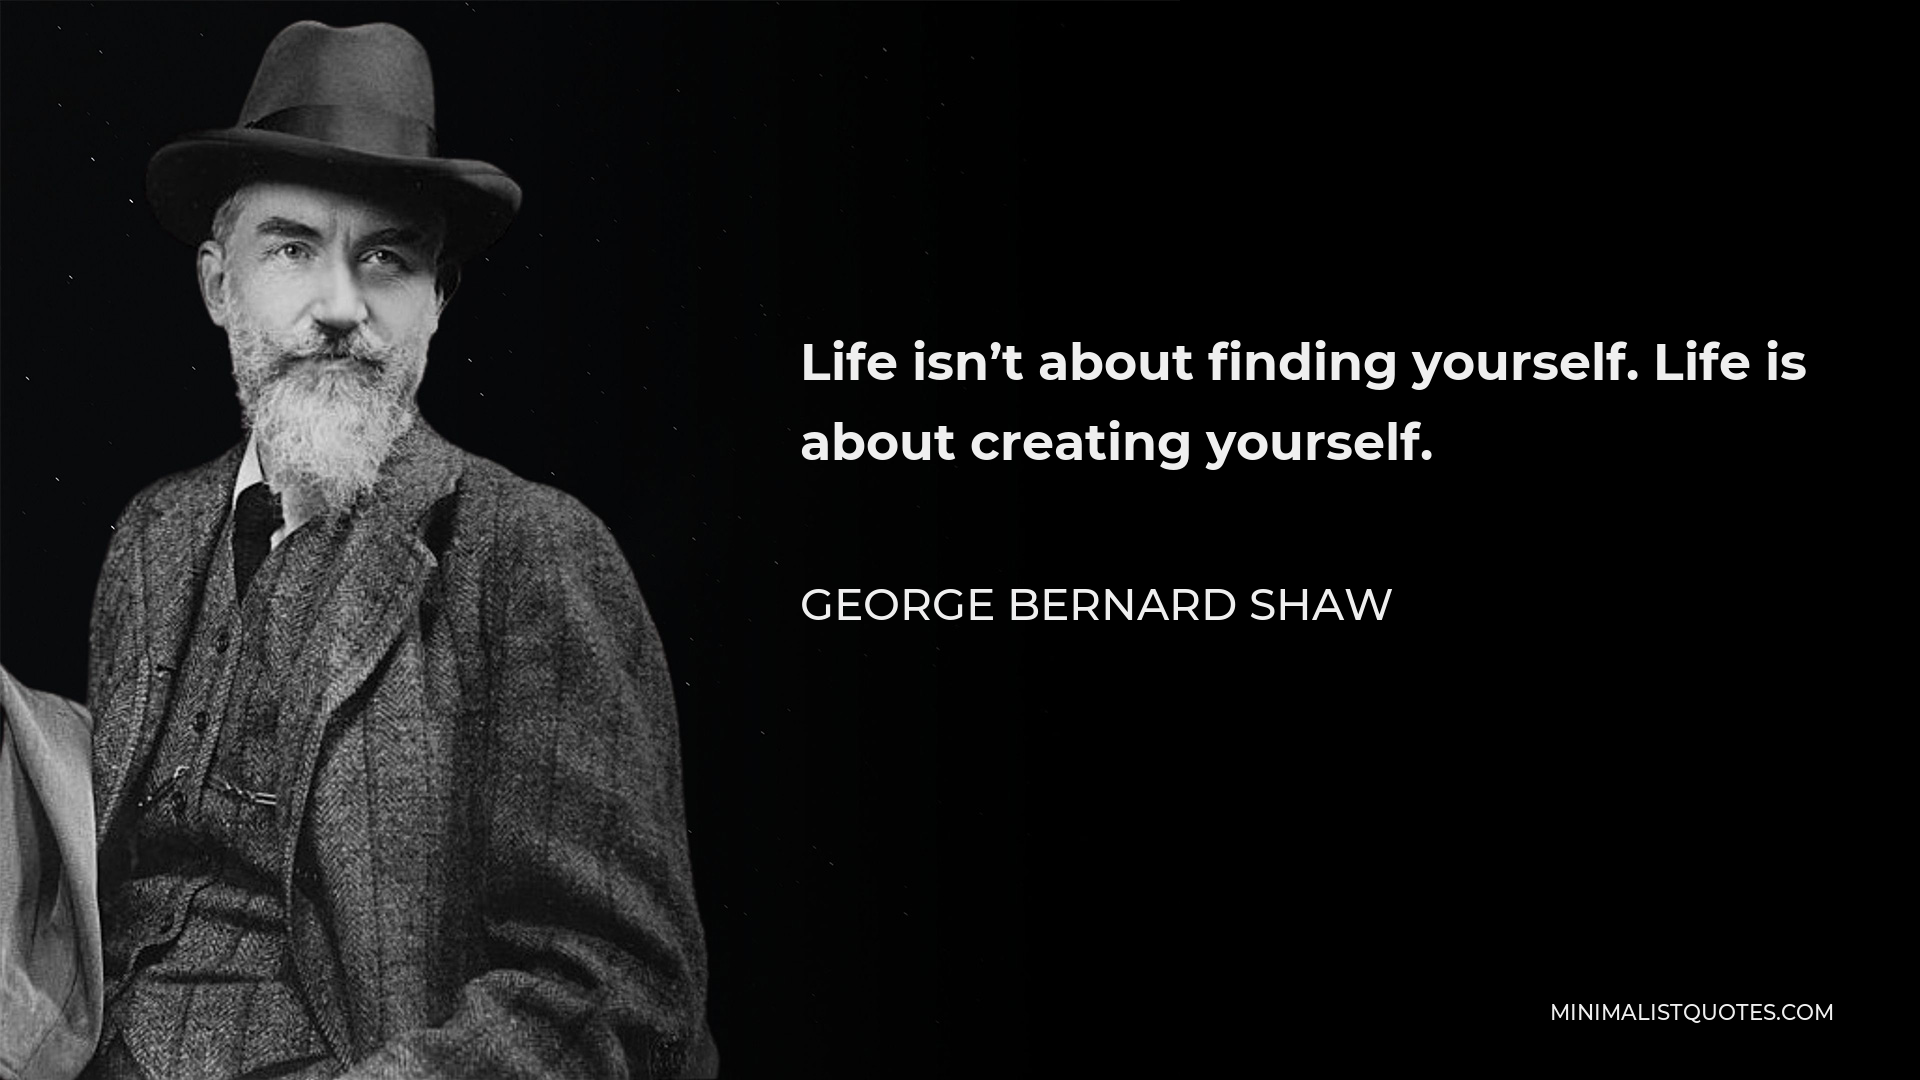 George Bernard Shaw Quote - Life isn’t about finding yourself. Life is about creating yourself.